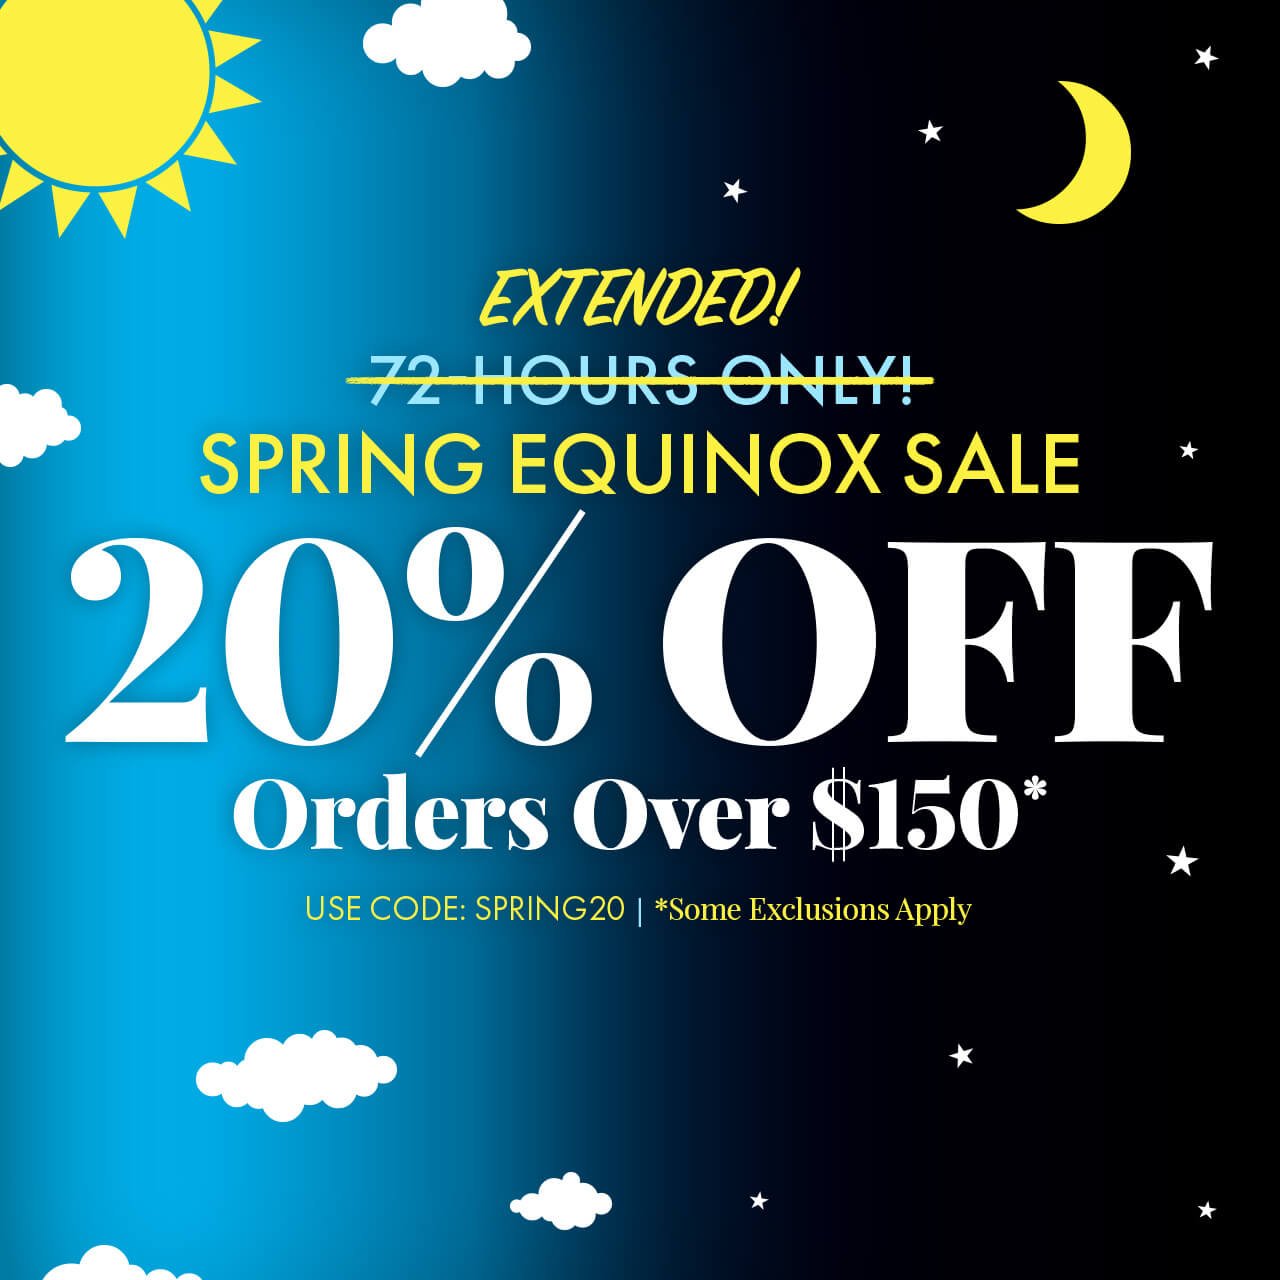 72-hour Spring Equinox Sale. 20% Off Orders Over \\$150. Use Promo Code SPRING20